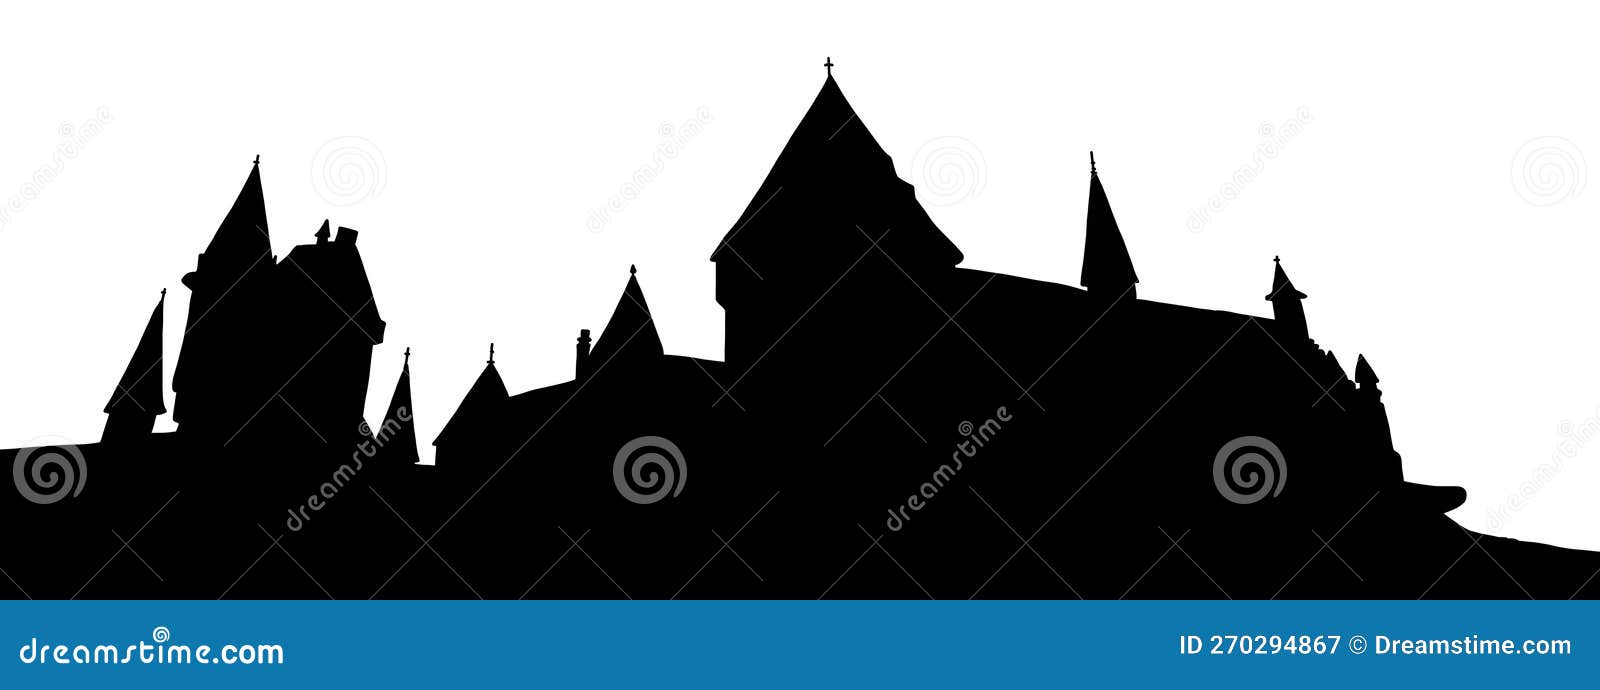 school of witchcraft and wizardry. castle with many towers. landscape hogwarts simple black and white 